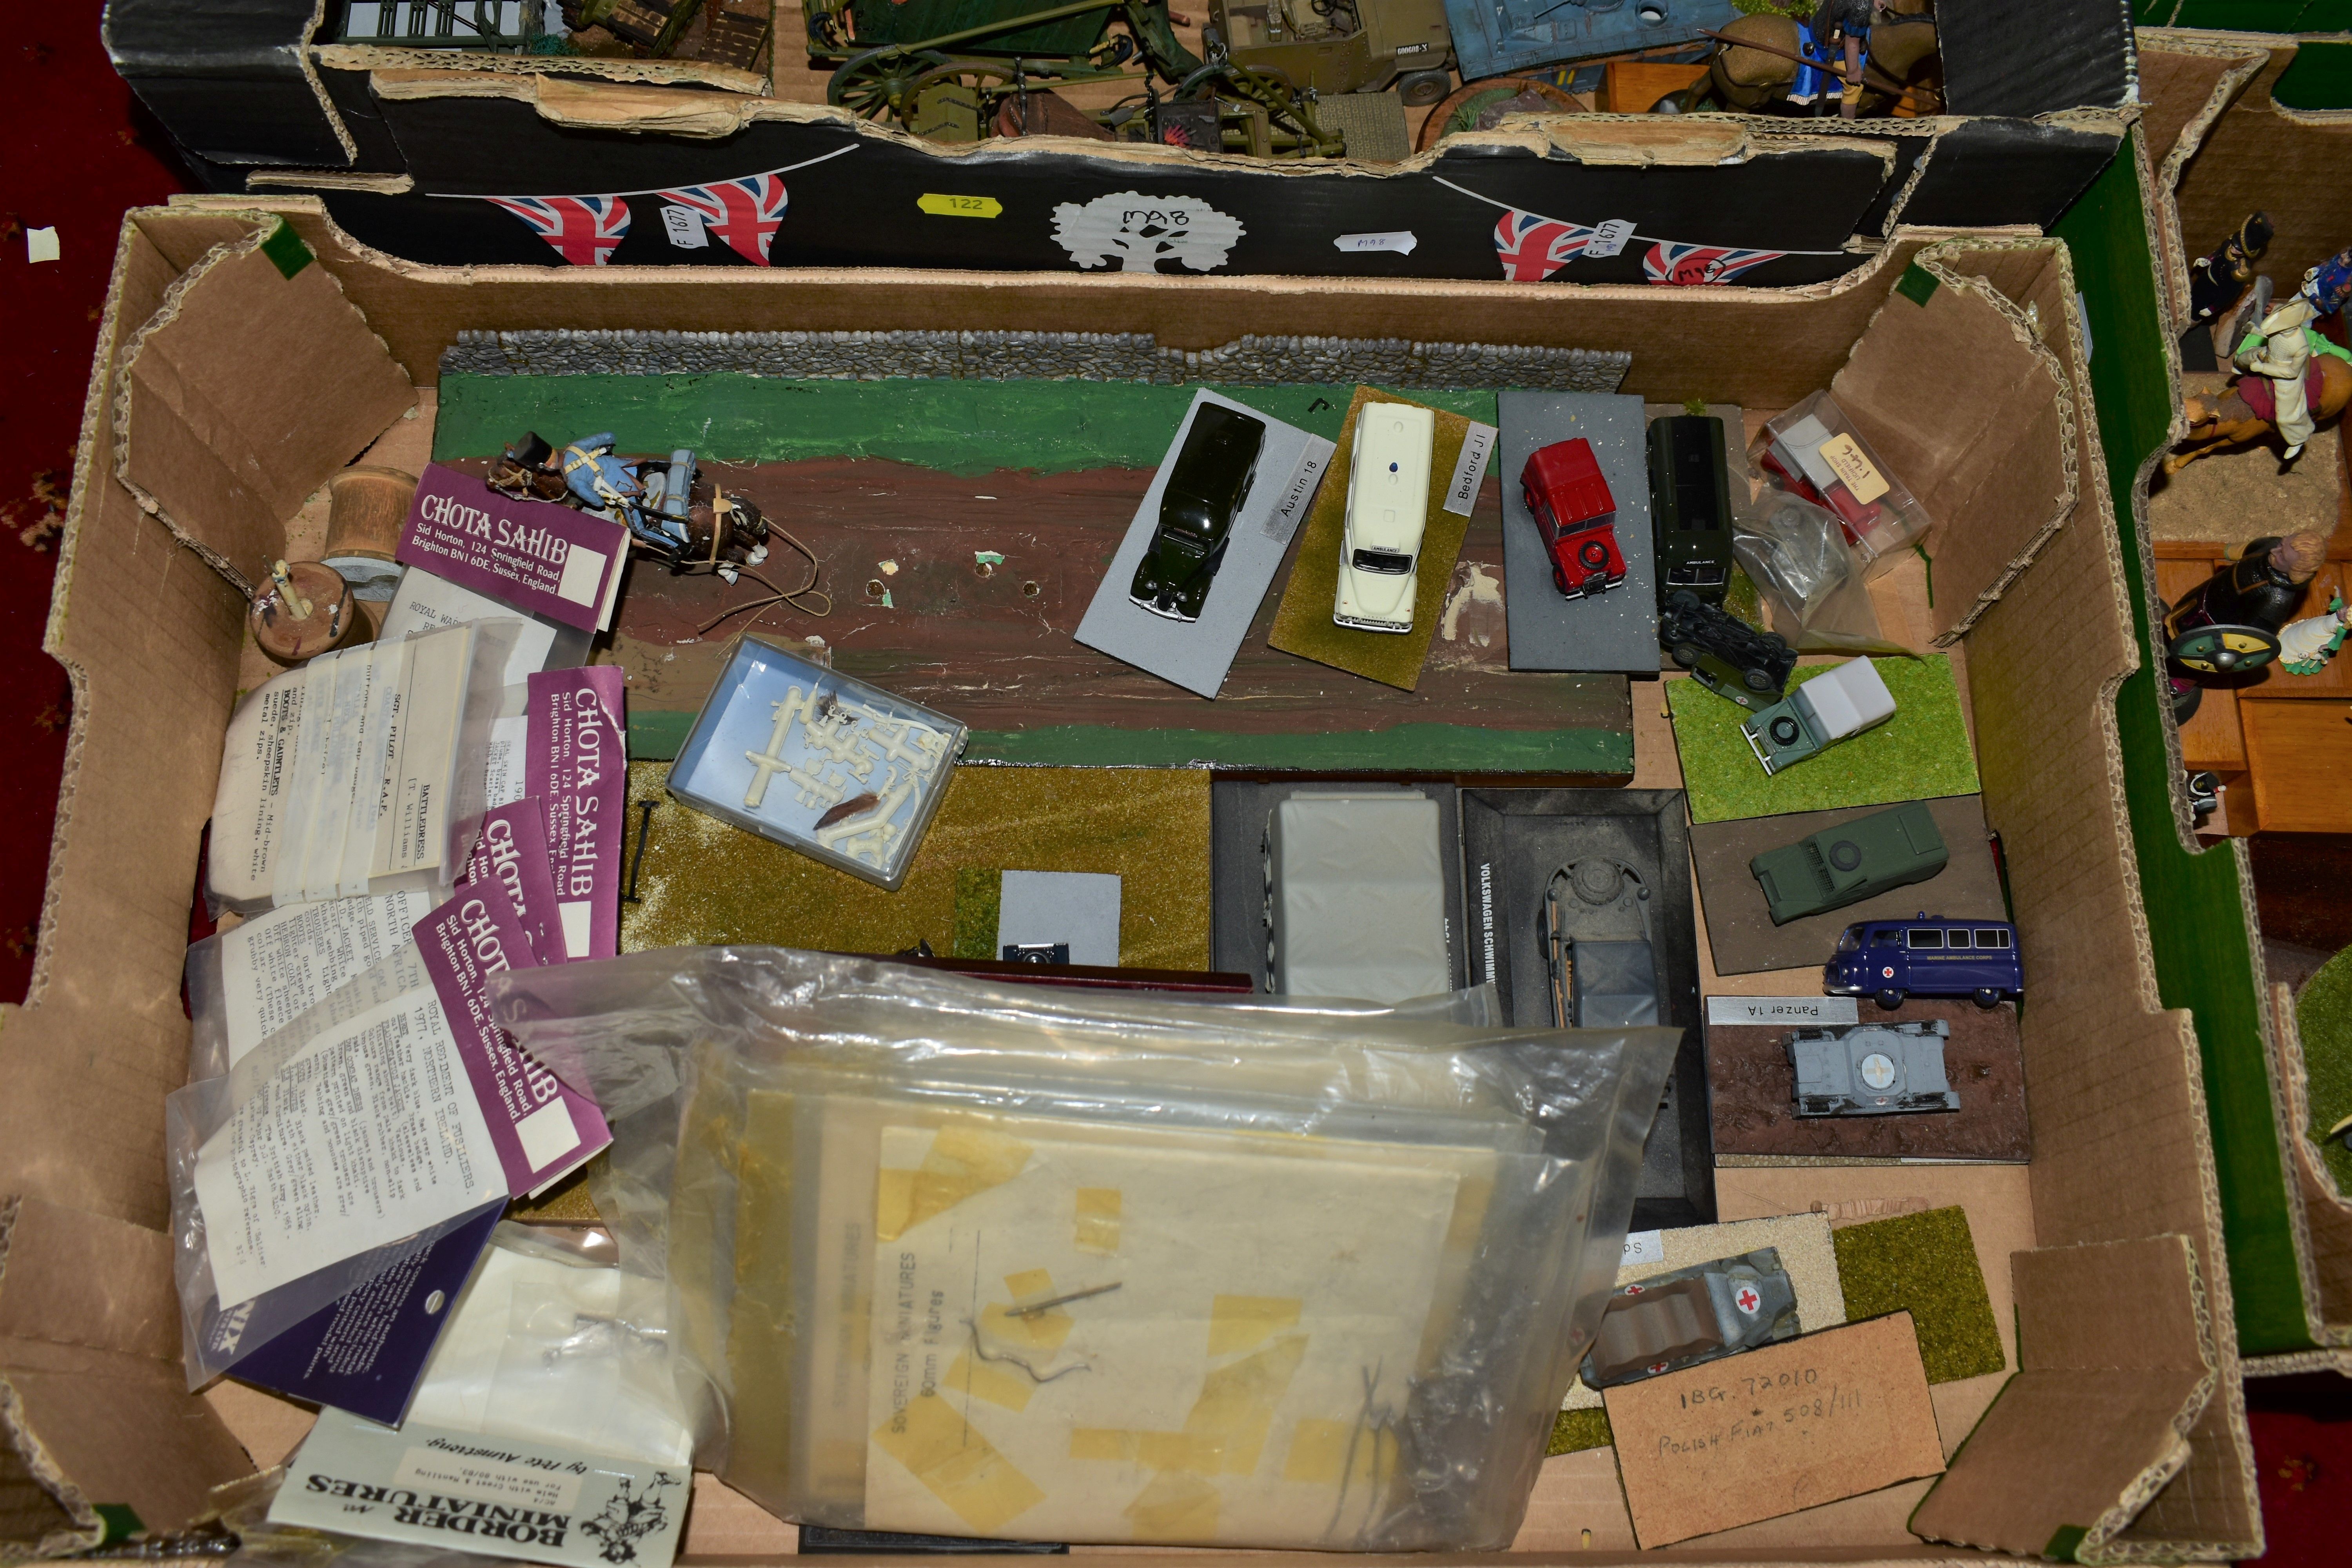 A QUANTITY OF ASSORTED MODEL DIORAMAS, FIGURES AND VEHICLES, majority are of military subjects and - Image 5 of 7